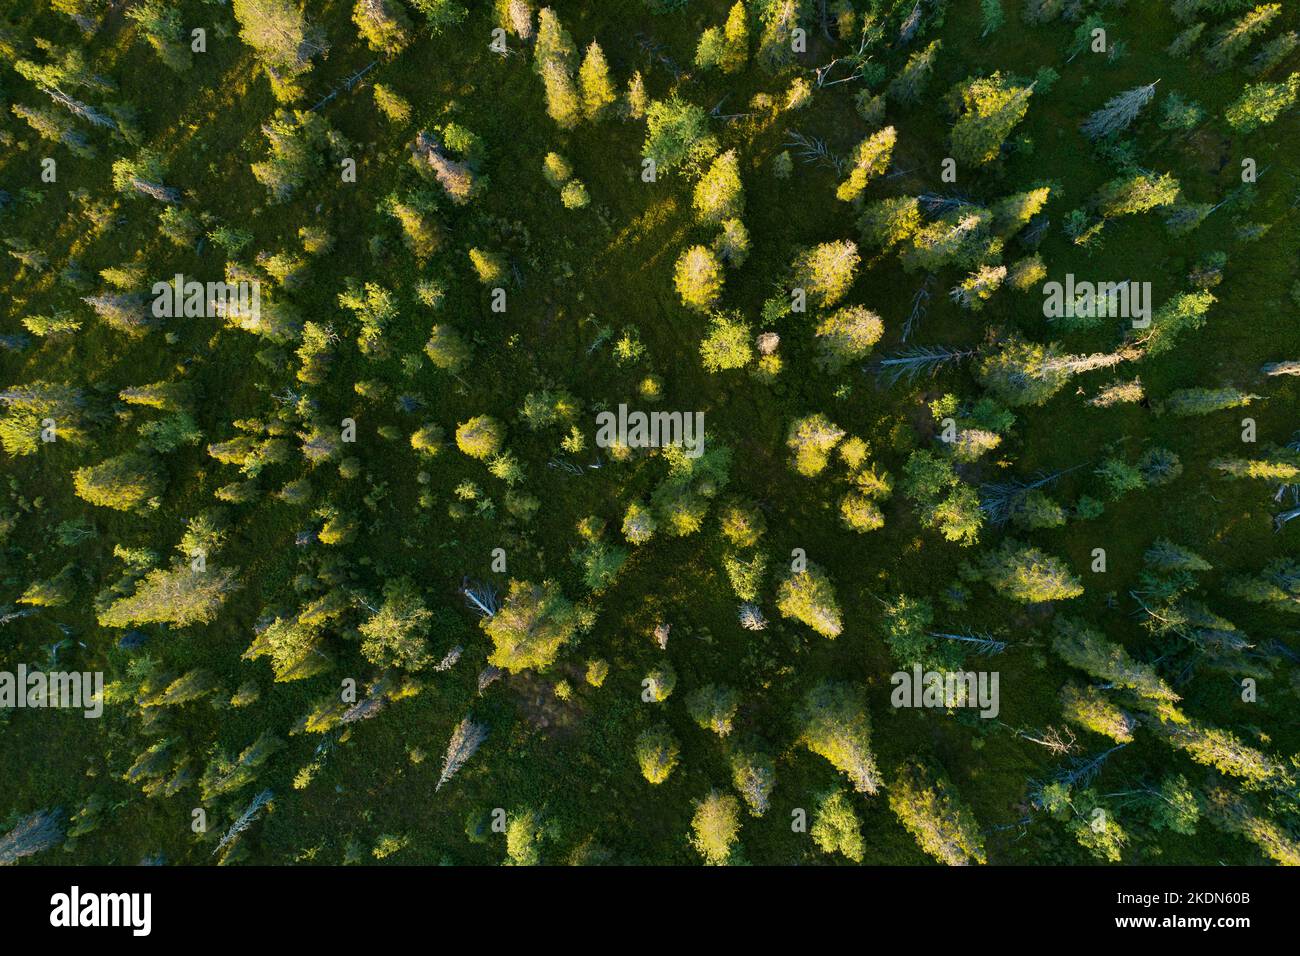 An aerial of an old-growth coniferous taiga forest in summery Riisitunturi National Park, Northern Finland Stock Photo